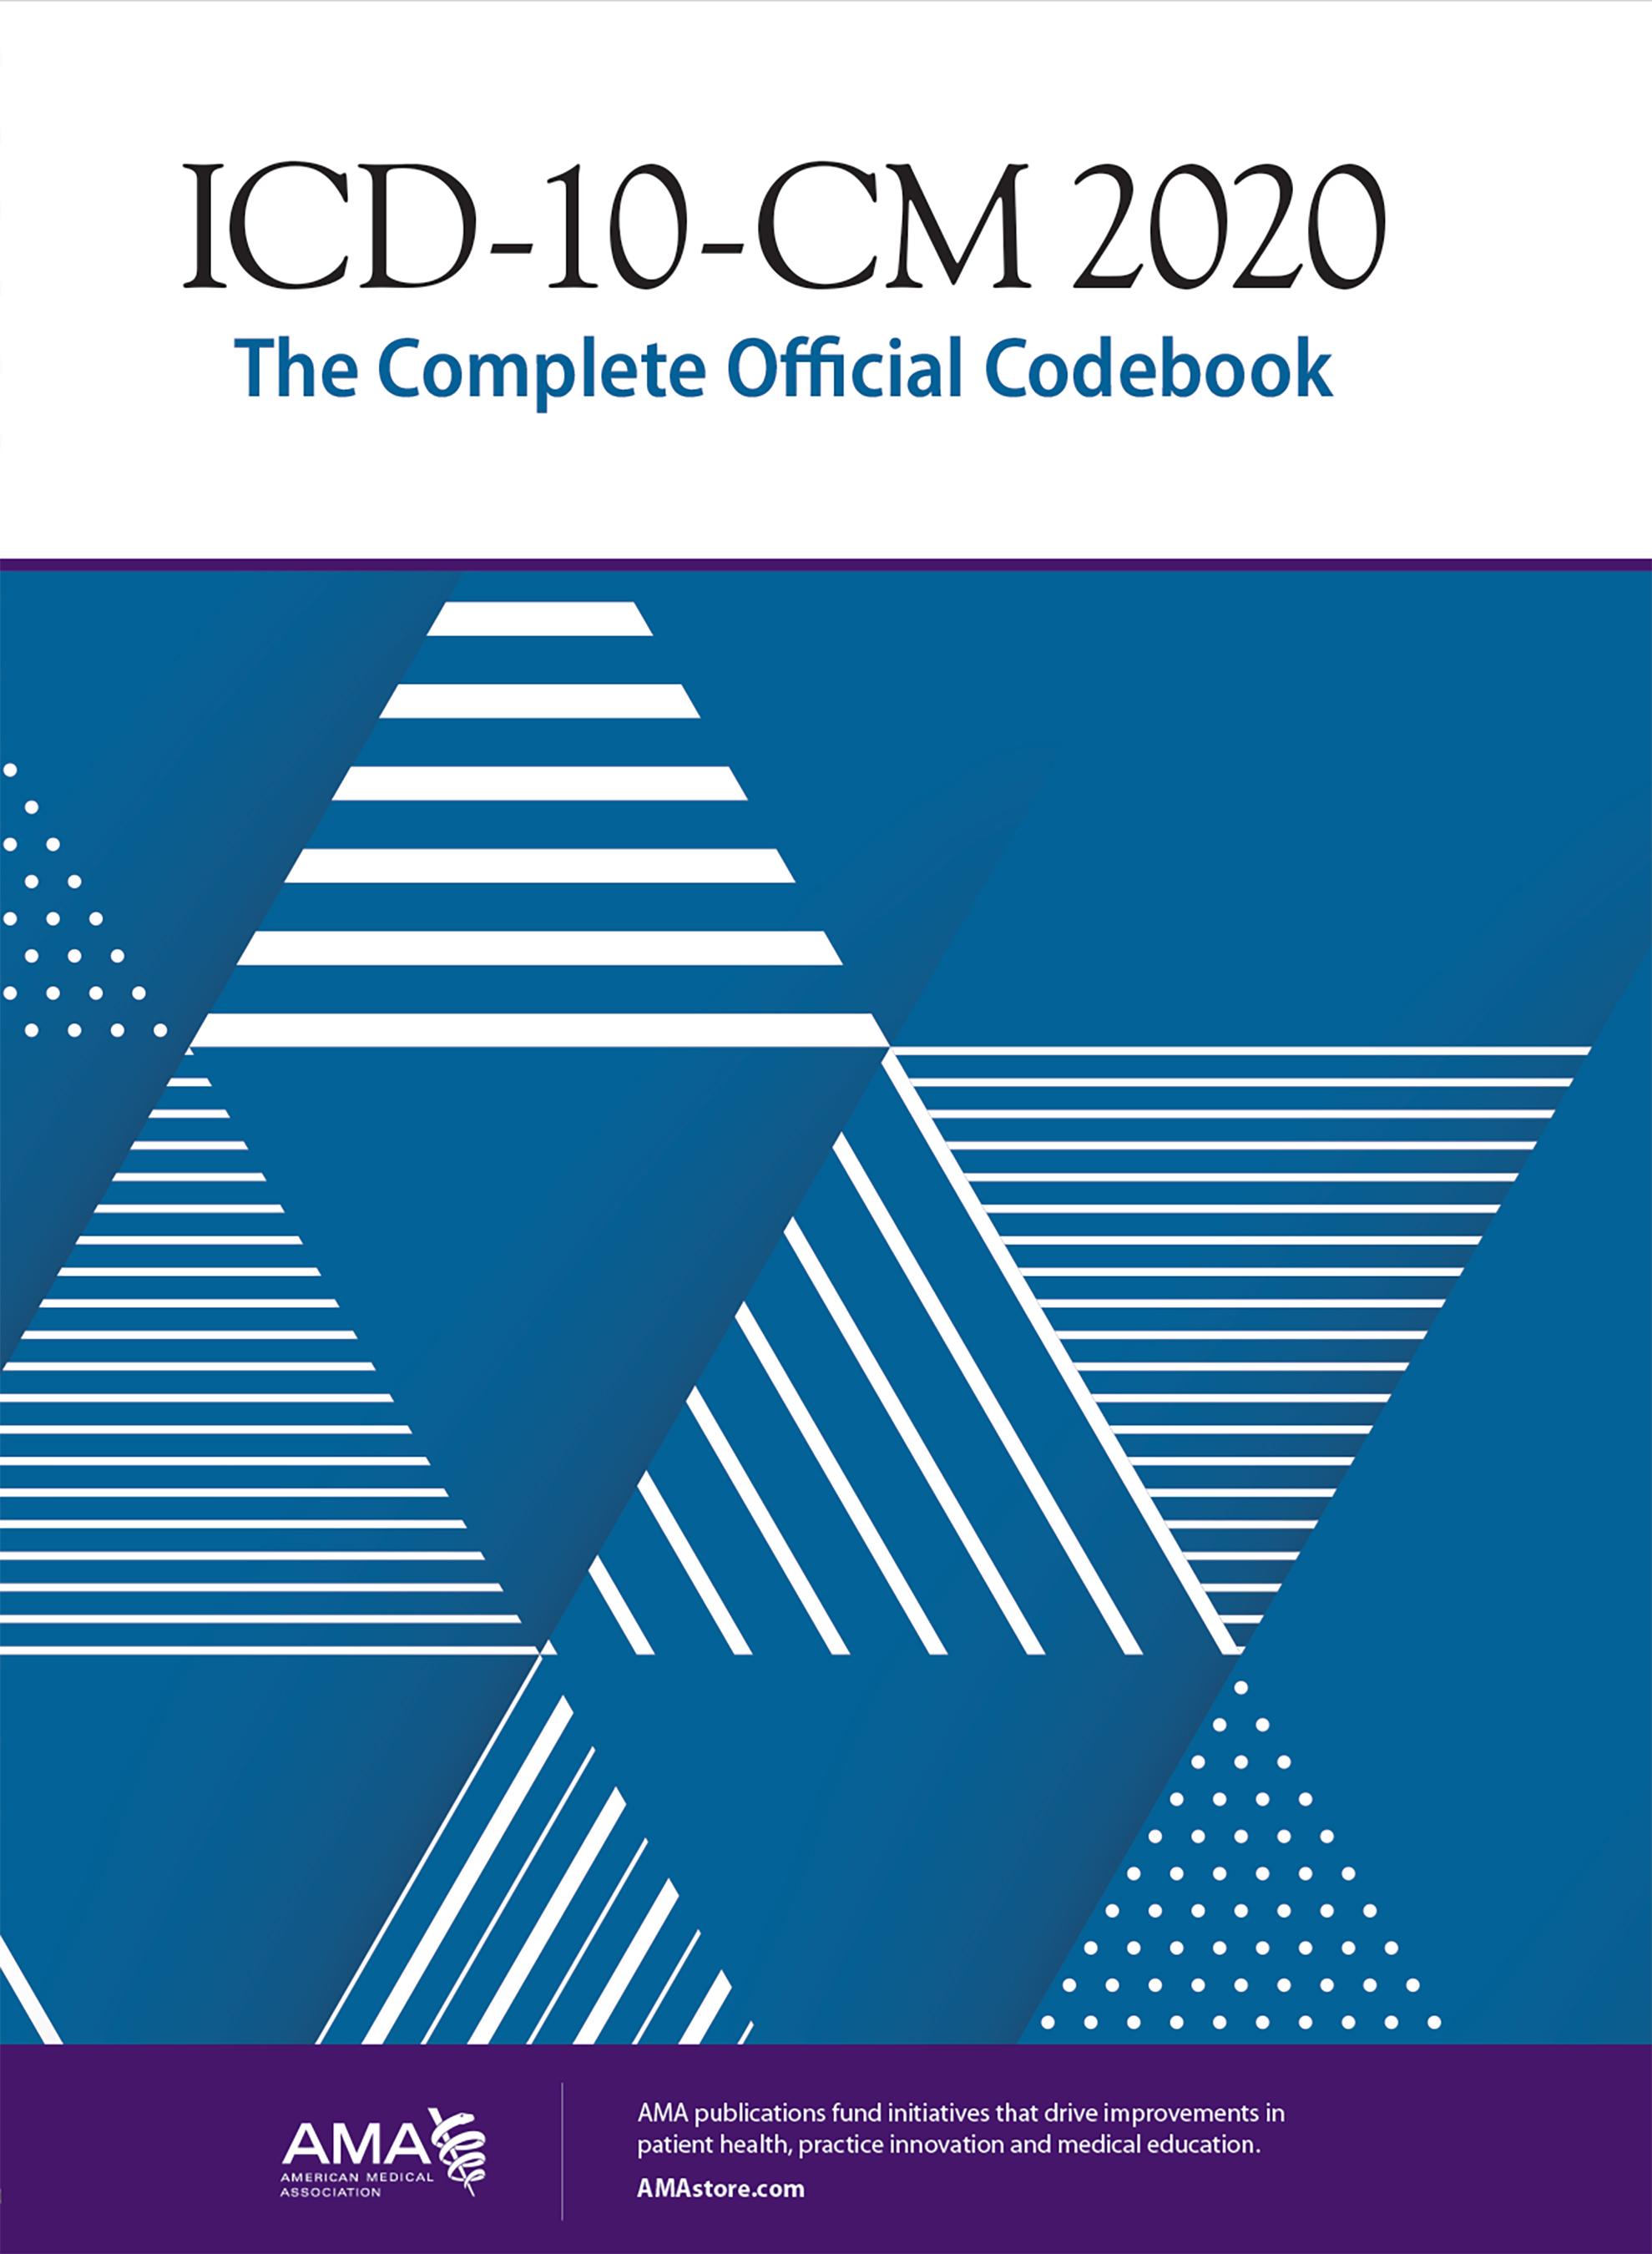 icd 10 cm 2018 the complete official codebook pdf